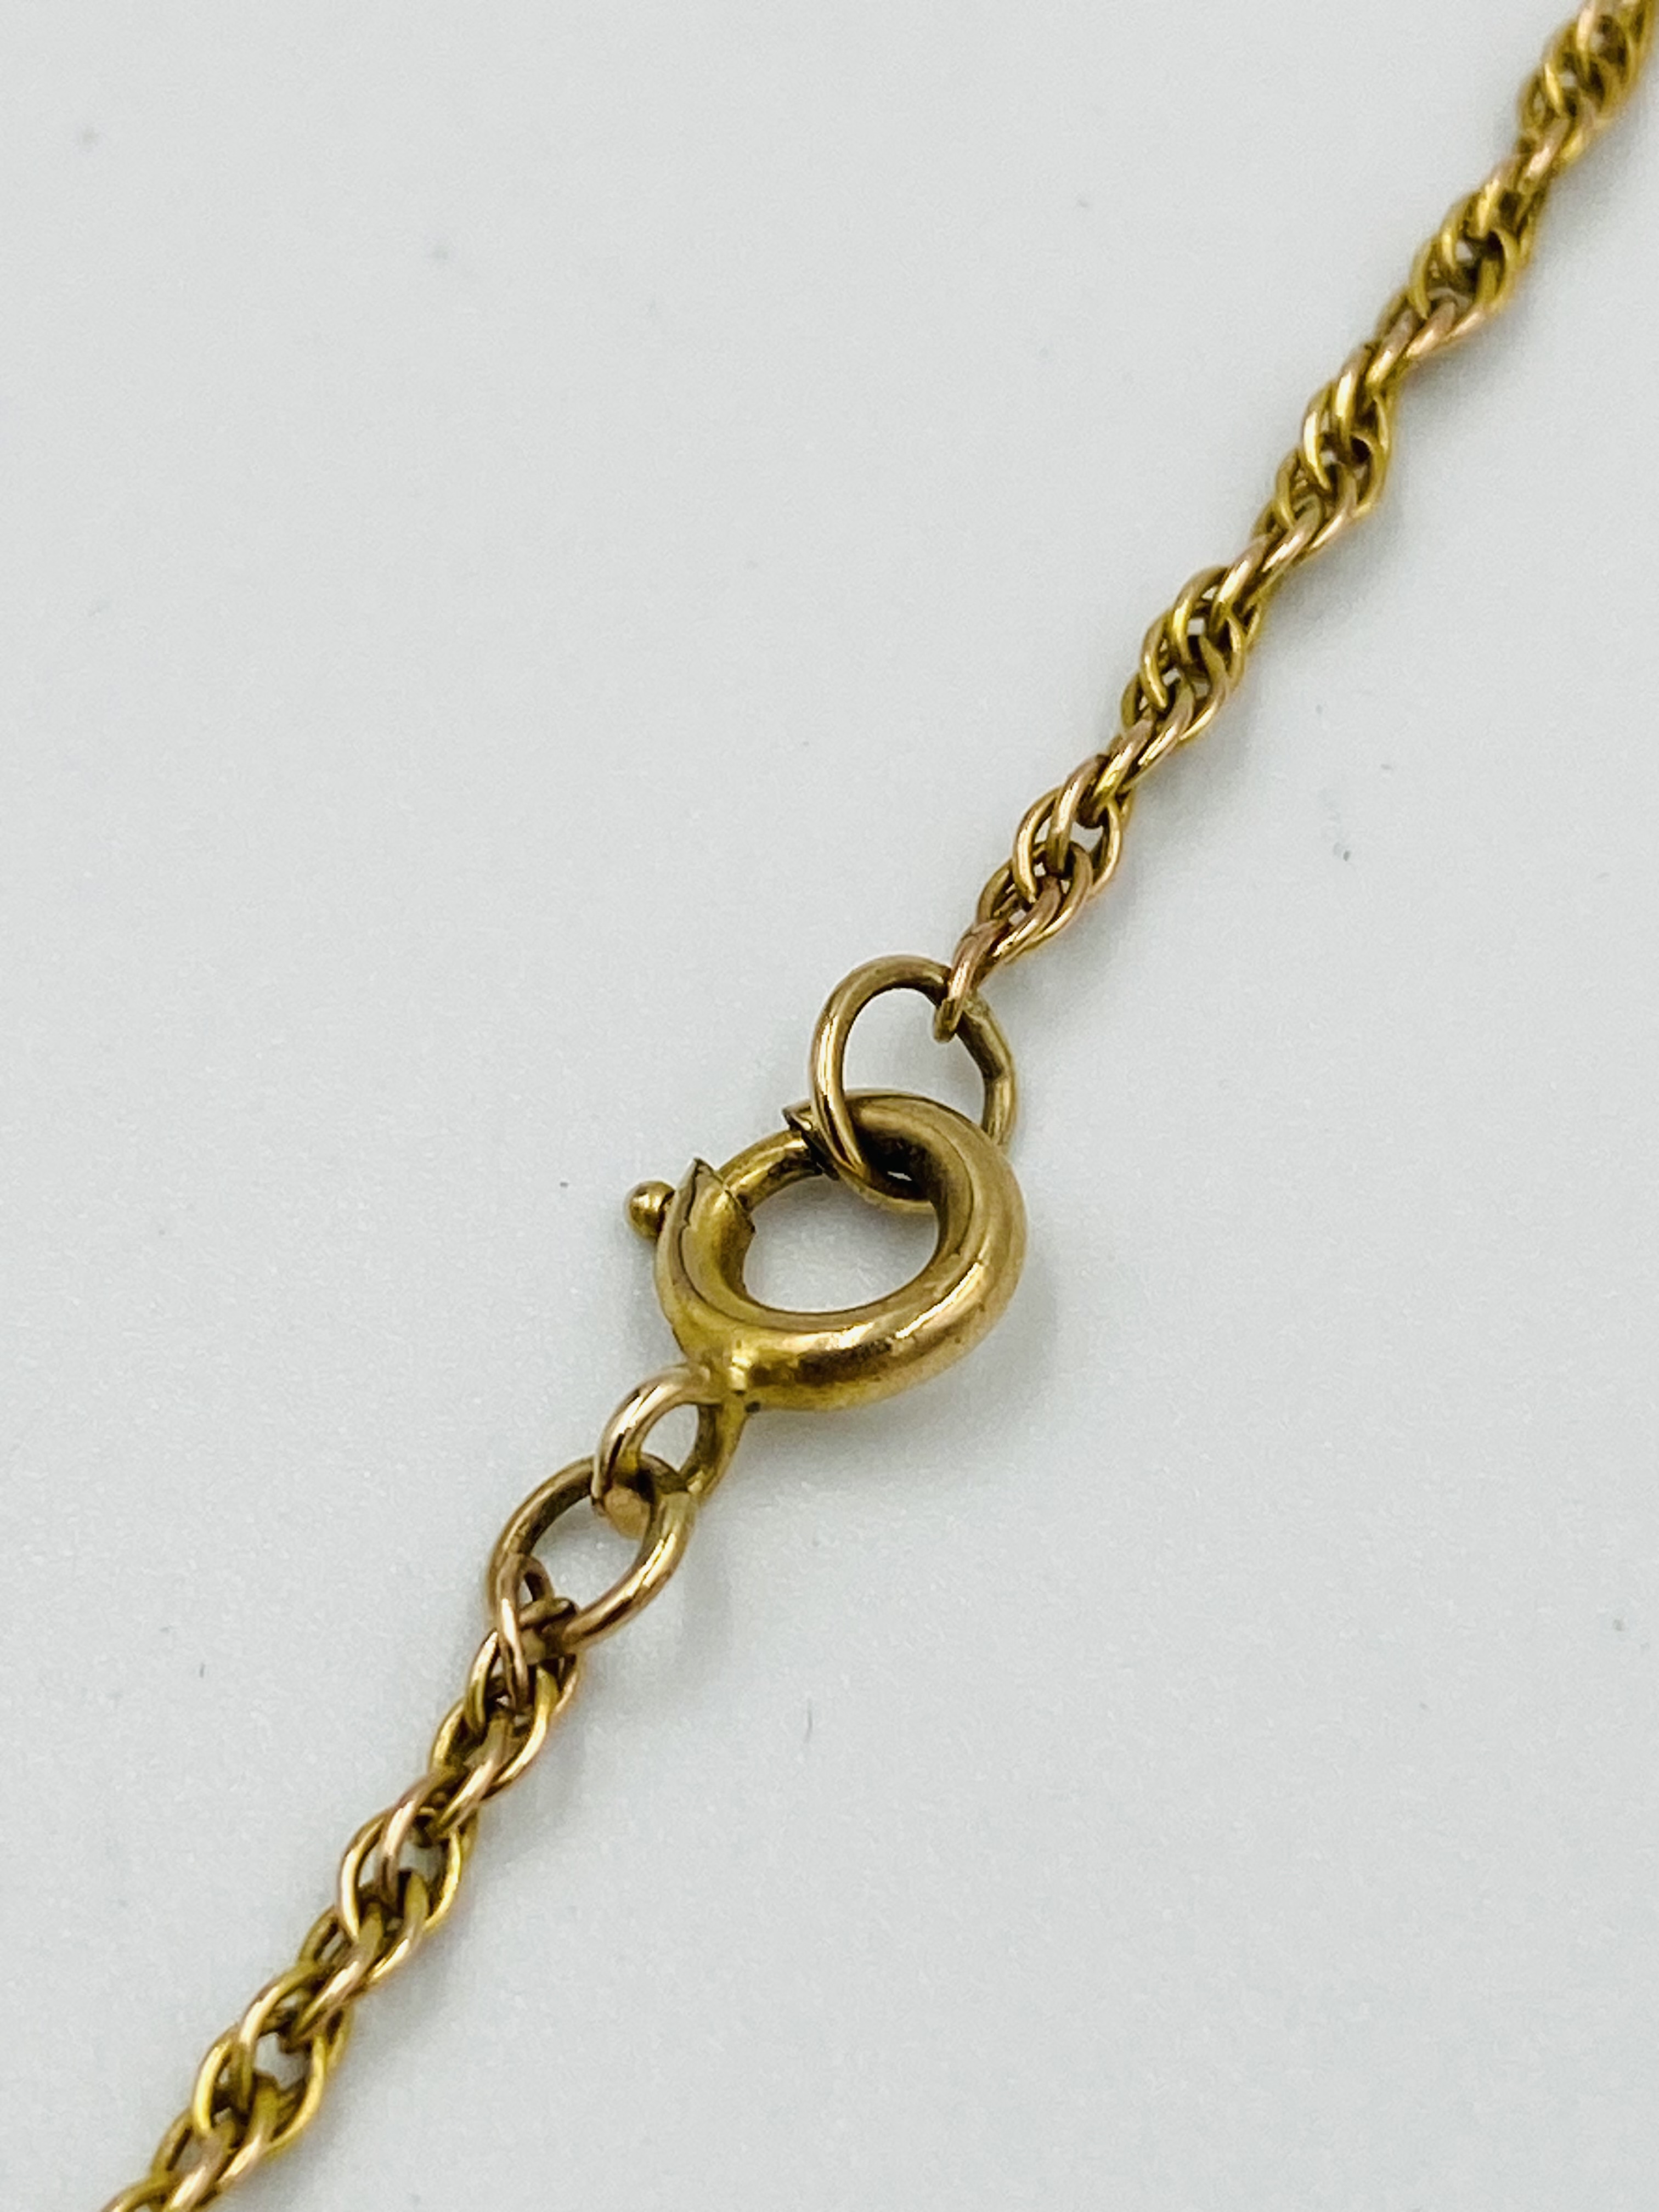 9ct gold cross set with amethysts, on a 9ct gold rope chain - Image 3 of 5